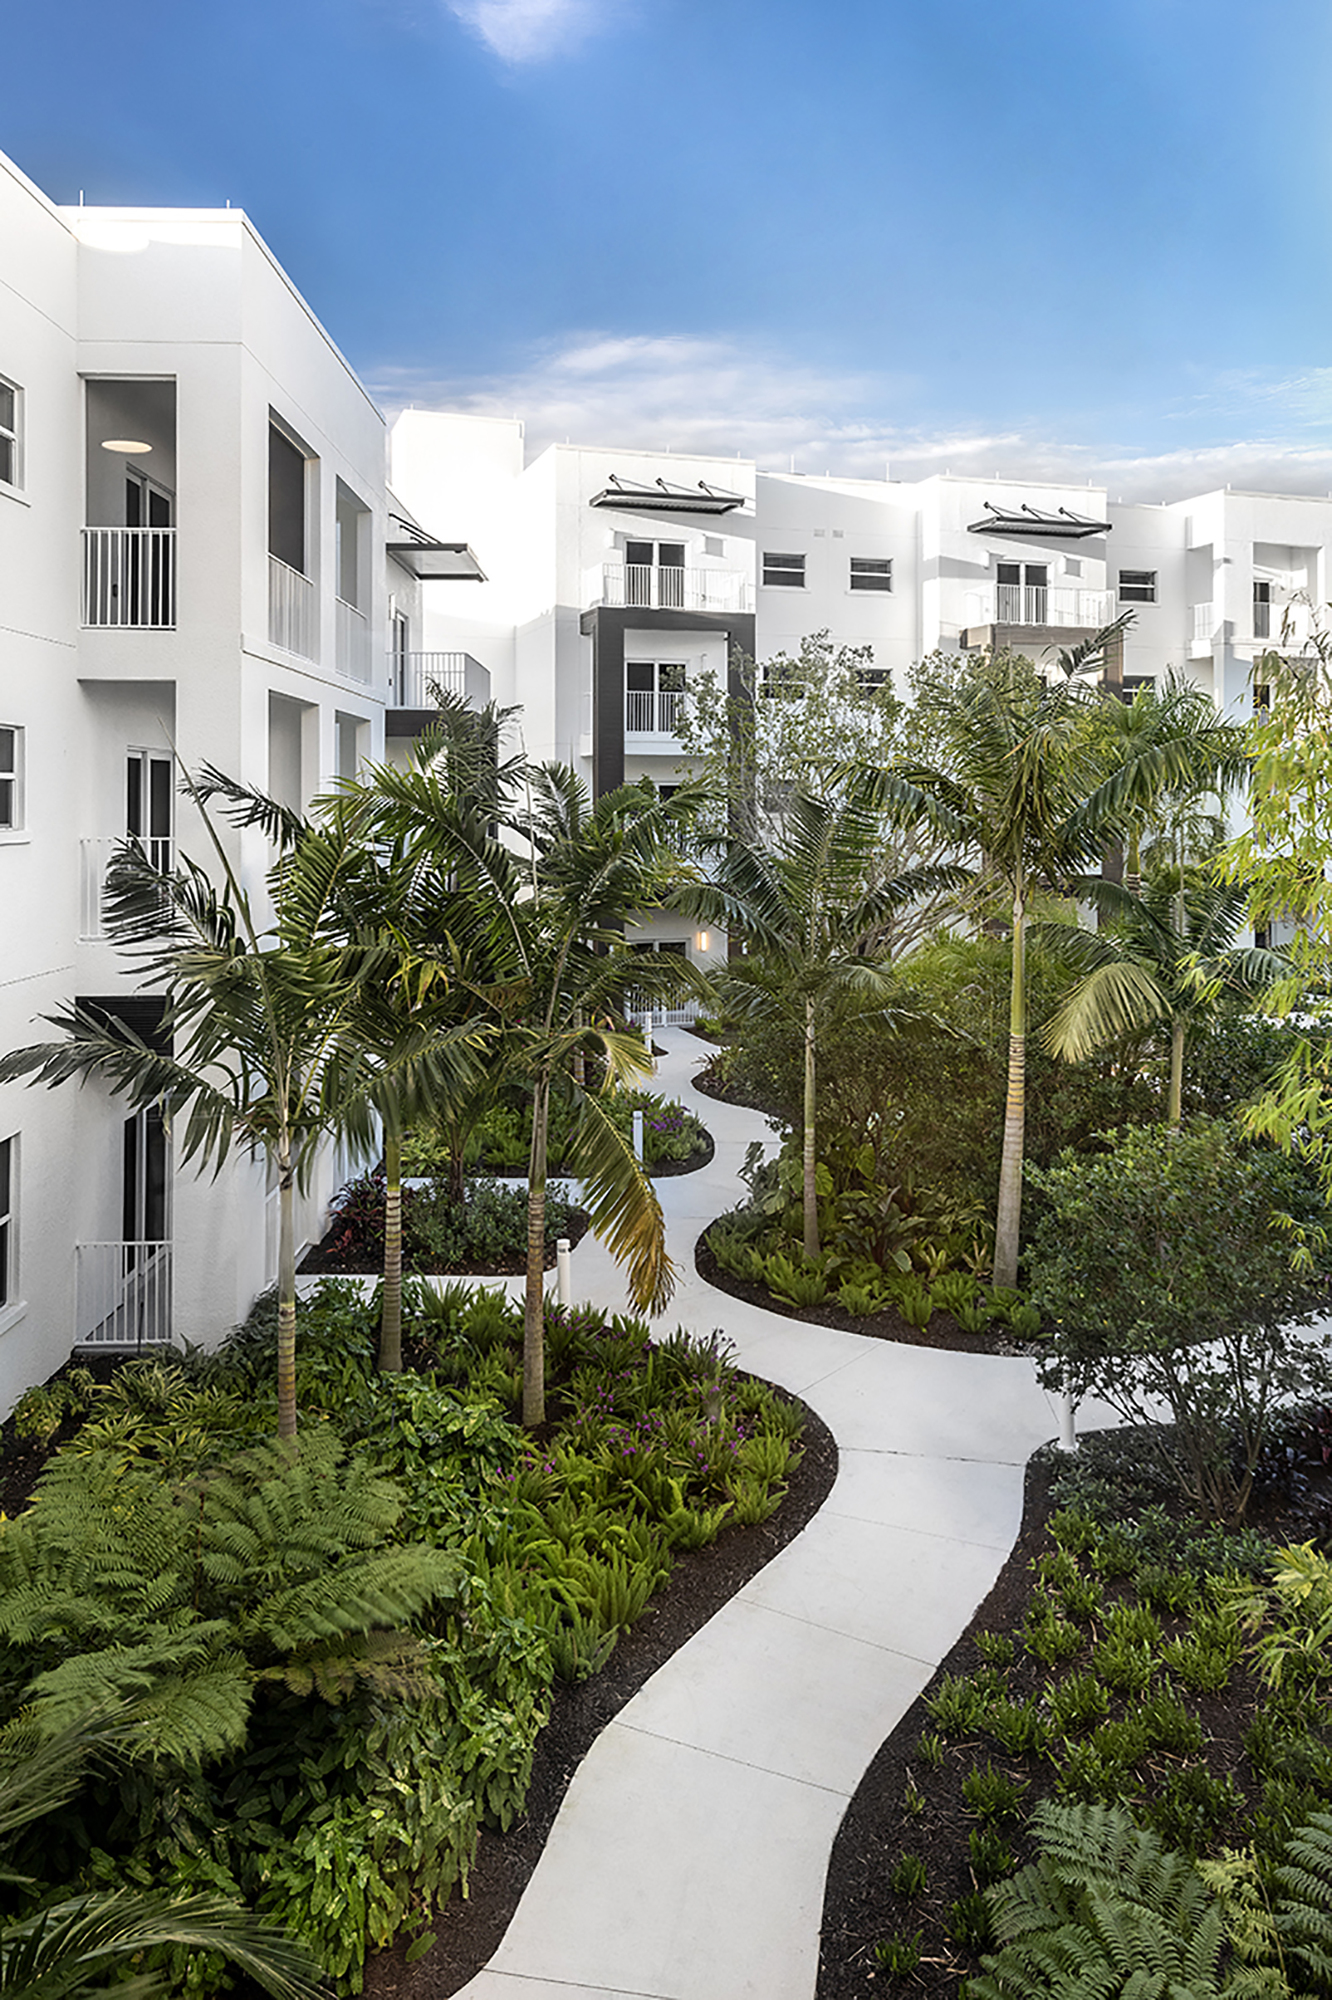 Quadrum Global invested $120 million in its first senior living community, Amavida in Fort Myers. It rents its mixed-use 460 units based on the apartment rental model. Courtesy Amavida